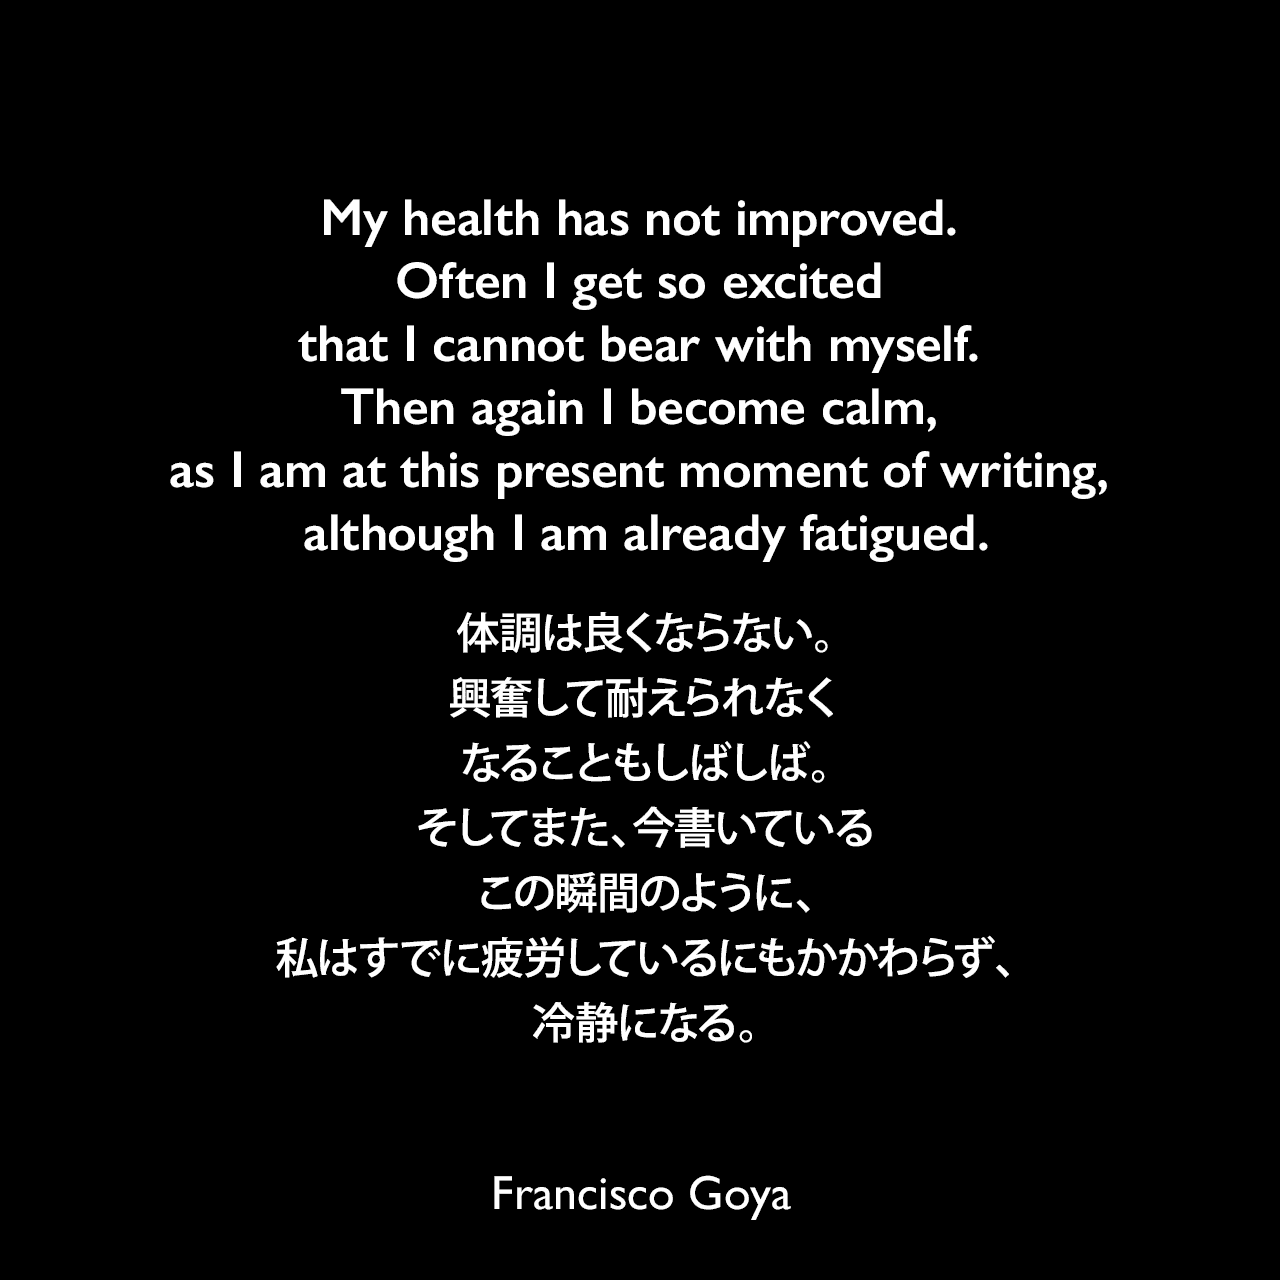 My health has not improved. Often I get so excited that I cannot bear with myself. Then again I become calm, as I am at this present moment of writing, although I am already fatigued.体調は良くならない。興奮して耐えられなくなることもしばしば。そしてまた、今書いているこの瞬間のように、私はすでに疲労しているにもかかわらず、冷静になる。- 1794年4月 ゴヤの親友「Don Martín Zapater」へ宛てた手紙よりFrancisco Goya